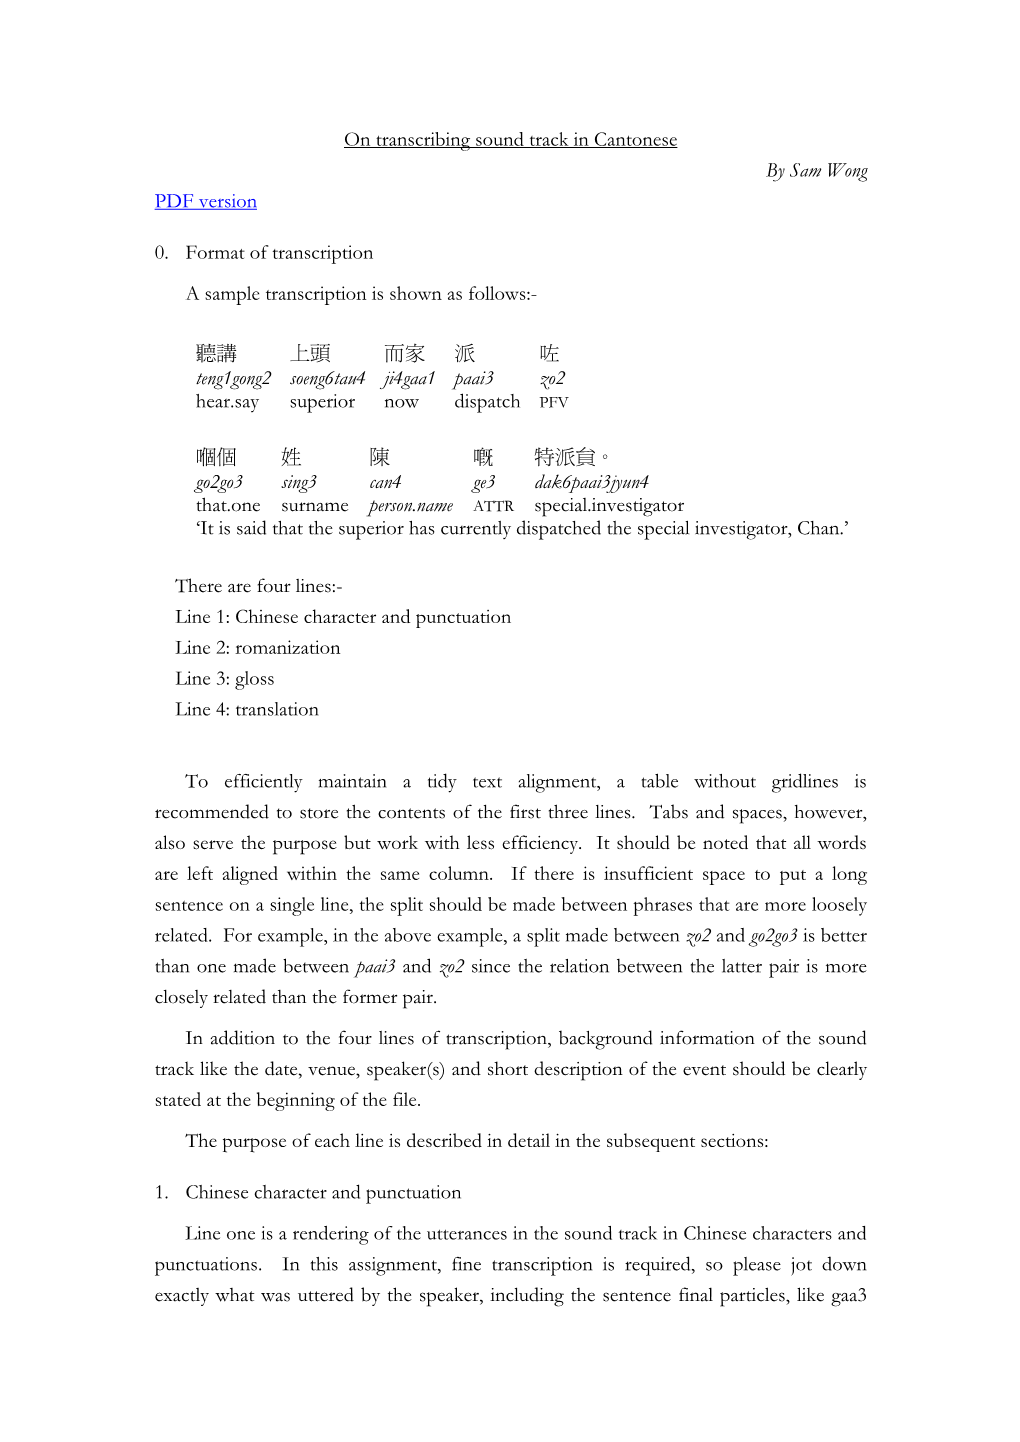 On Transcribing Sound Track in Cantonese by Sam Wong PDF Version